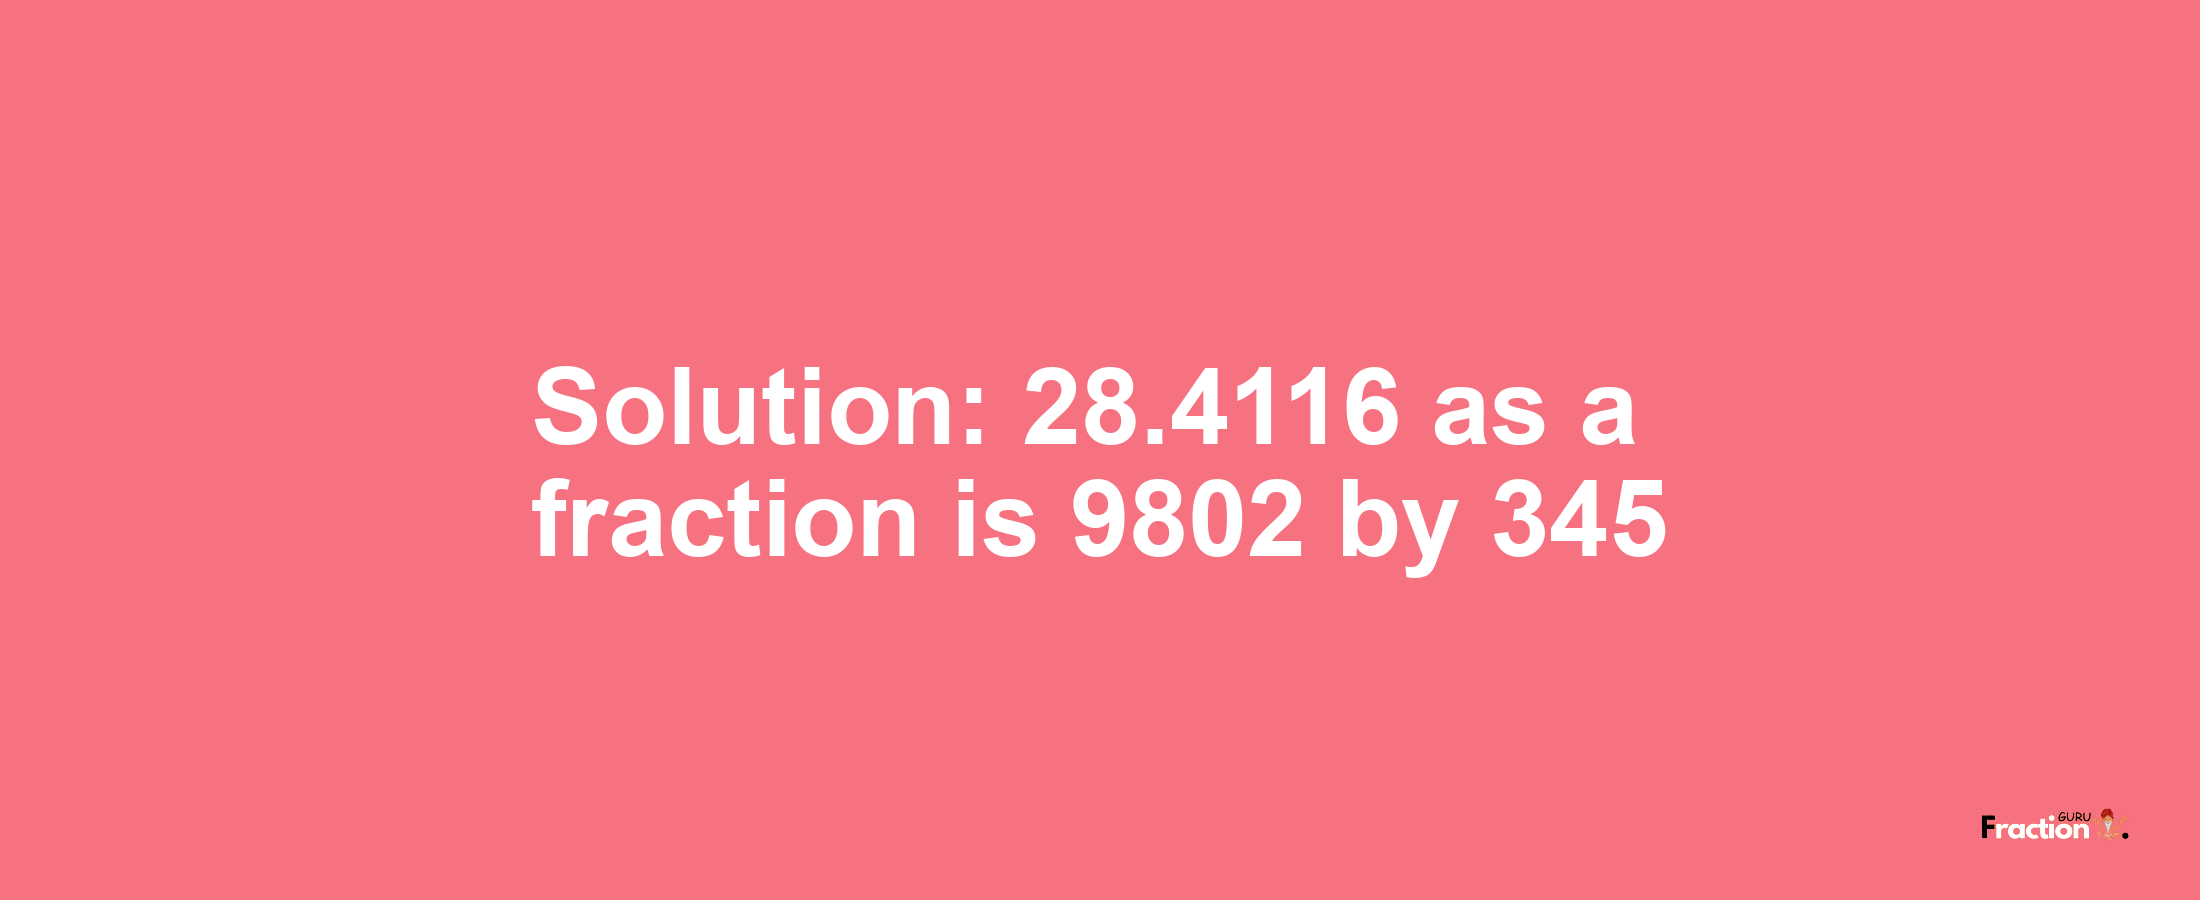 Solution:28.4116 as a fraction is 9802/345